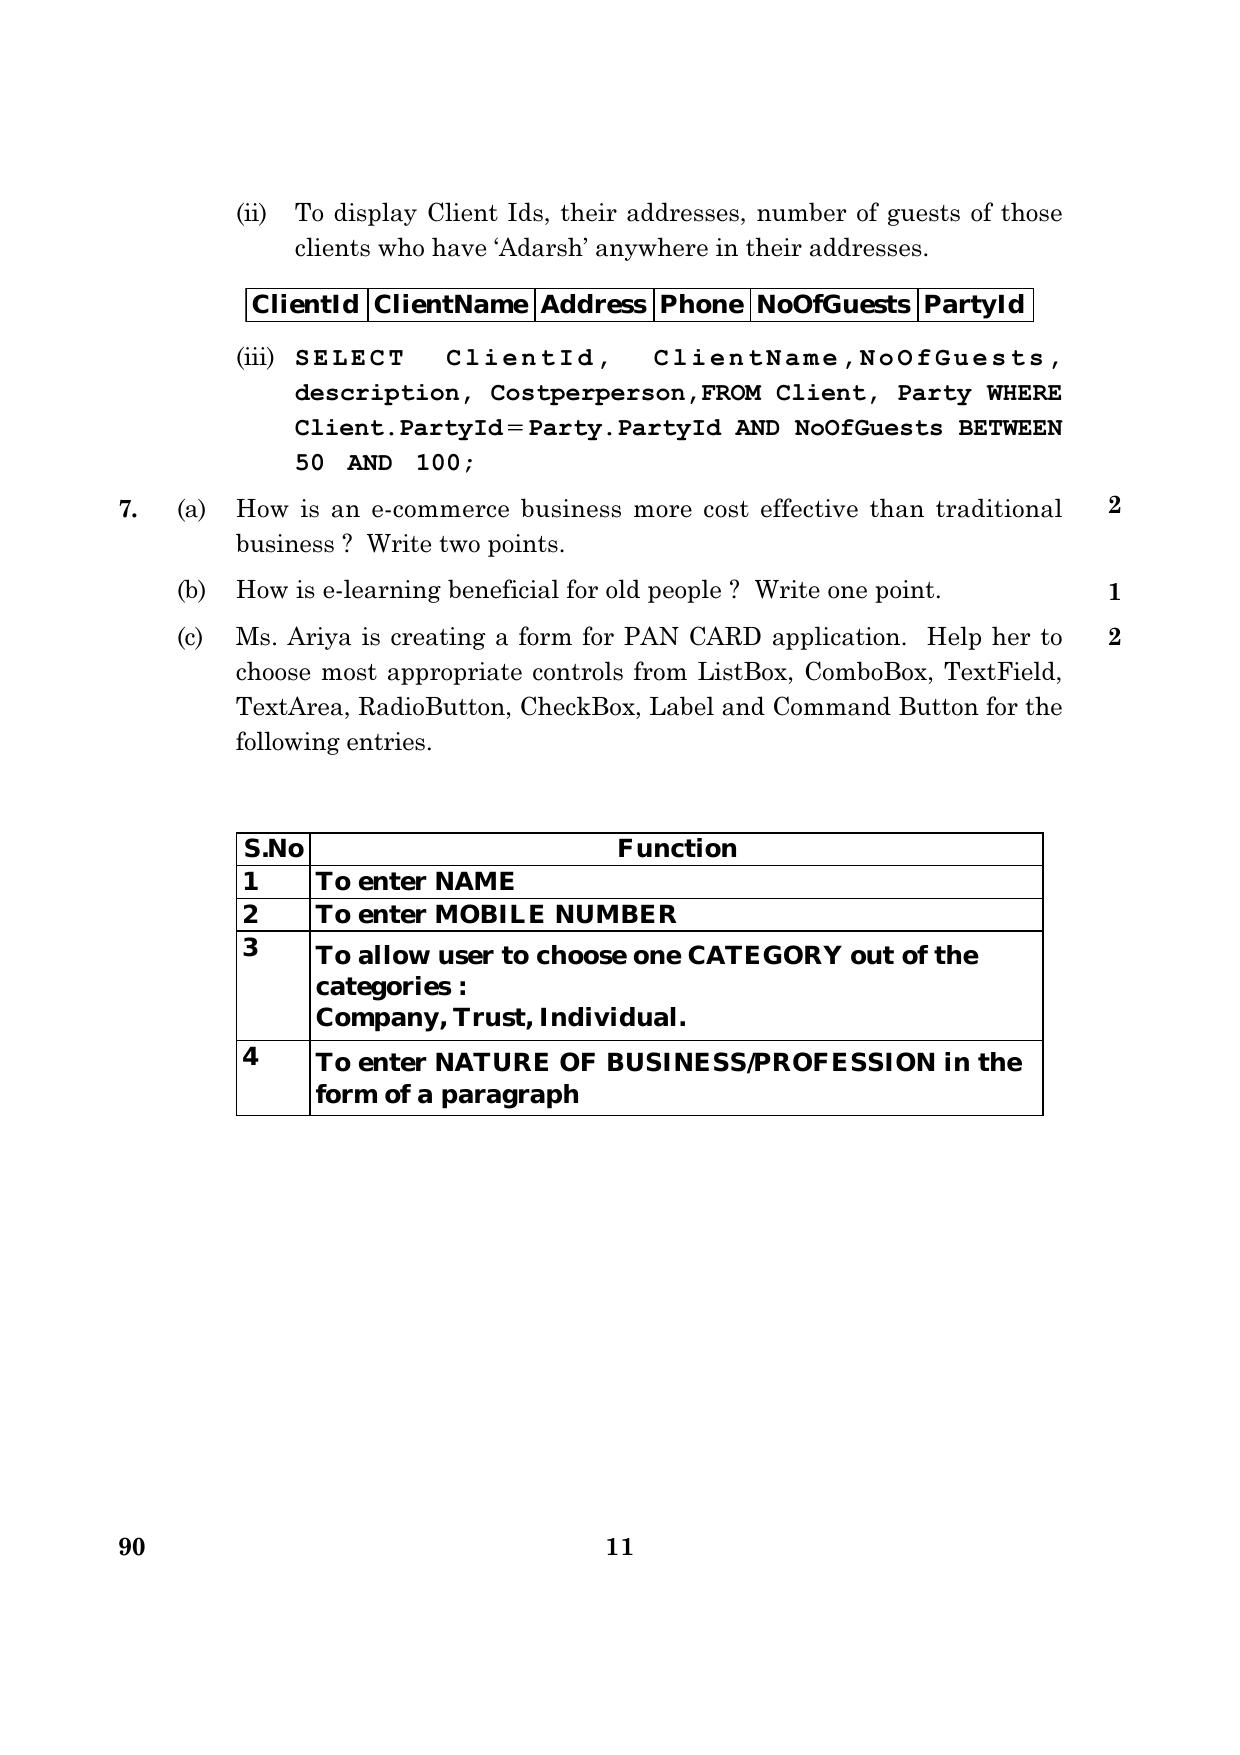 CBSE Class 12 090 INFORMATIC PRACTICES 2016 Question Paper - Page 11